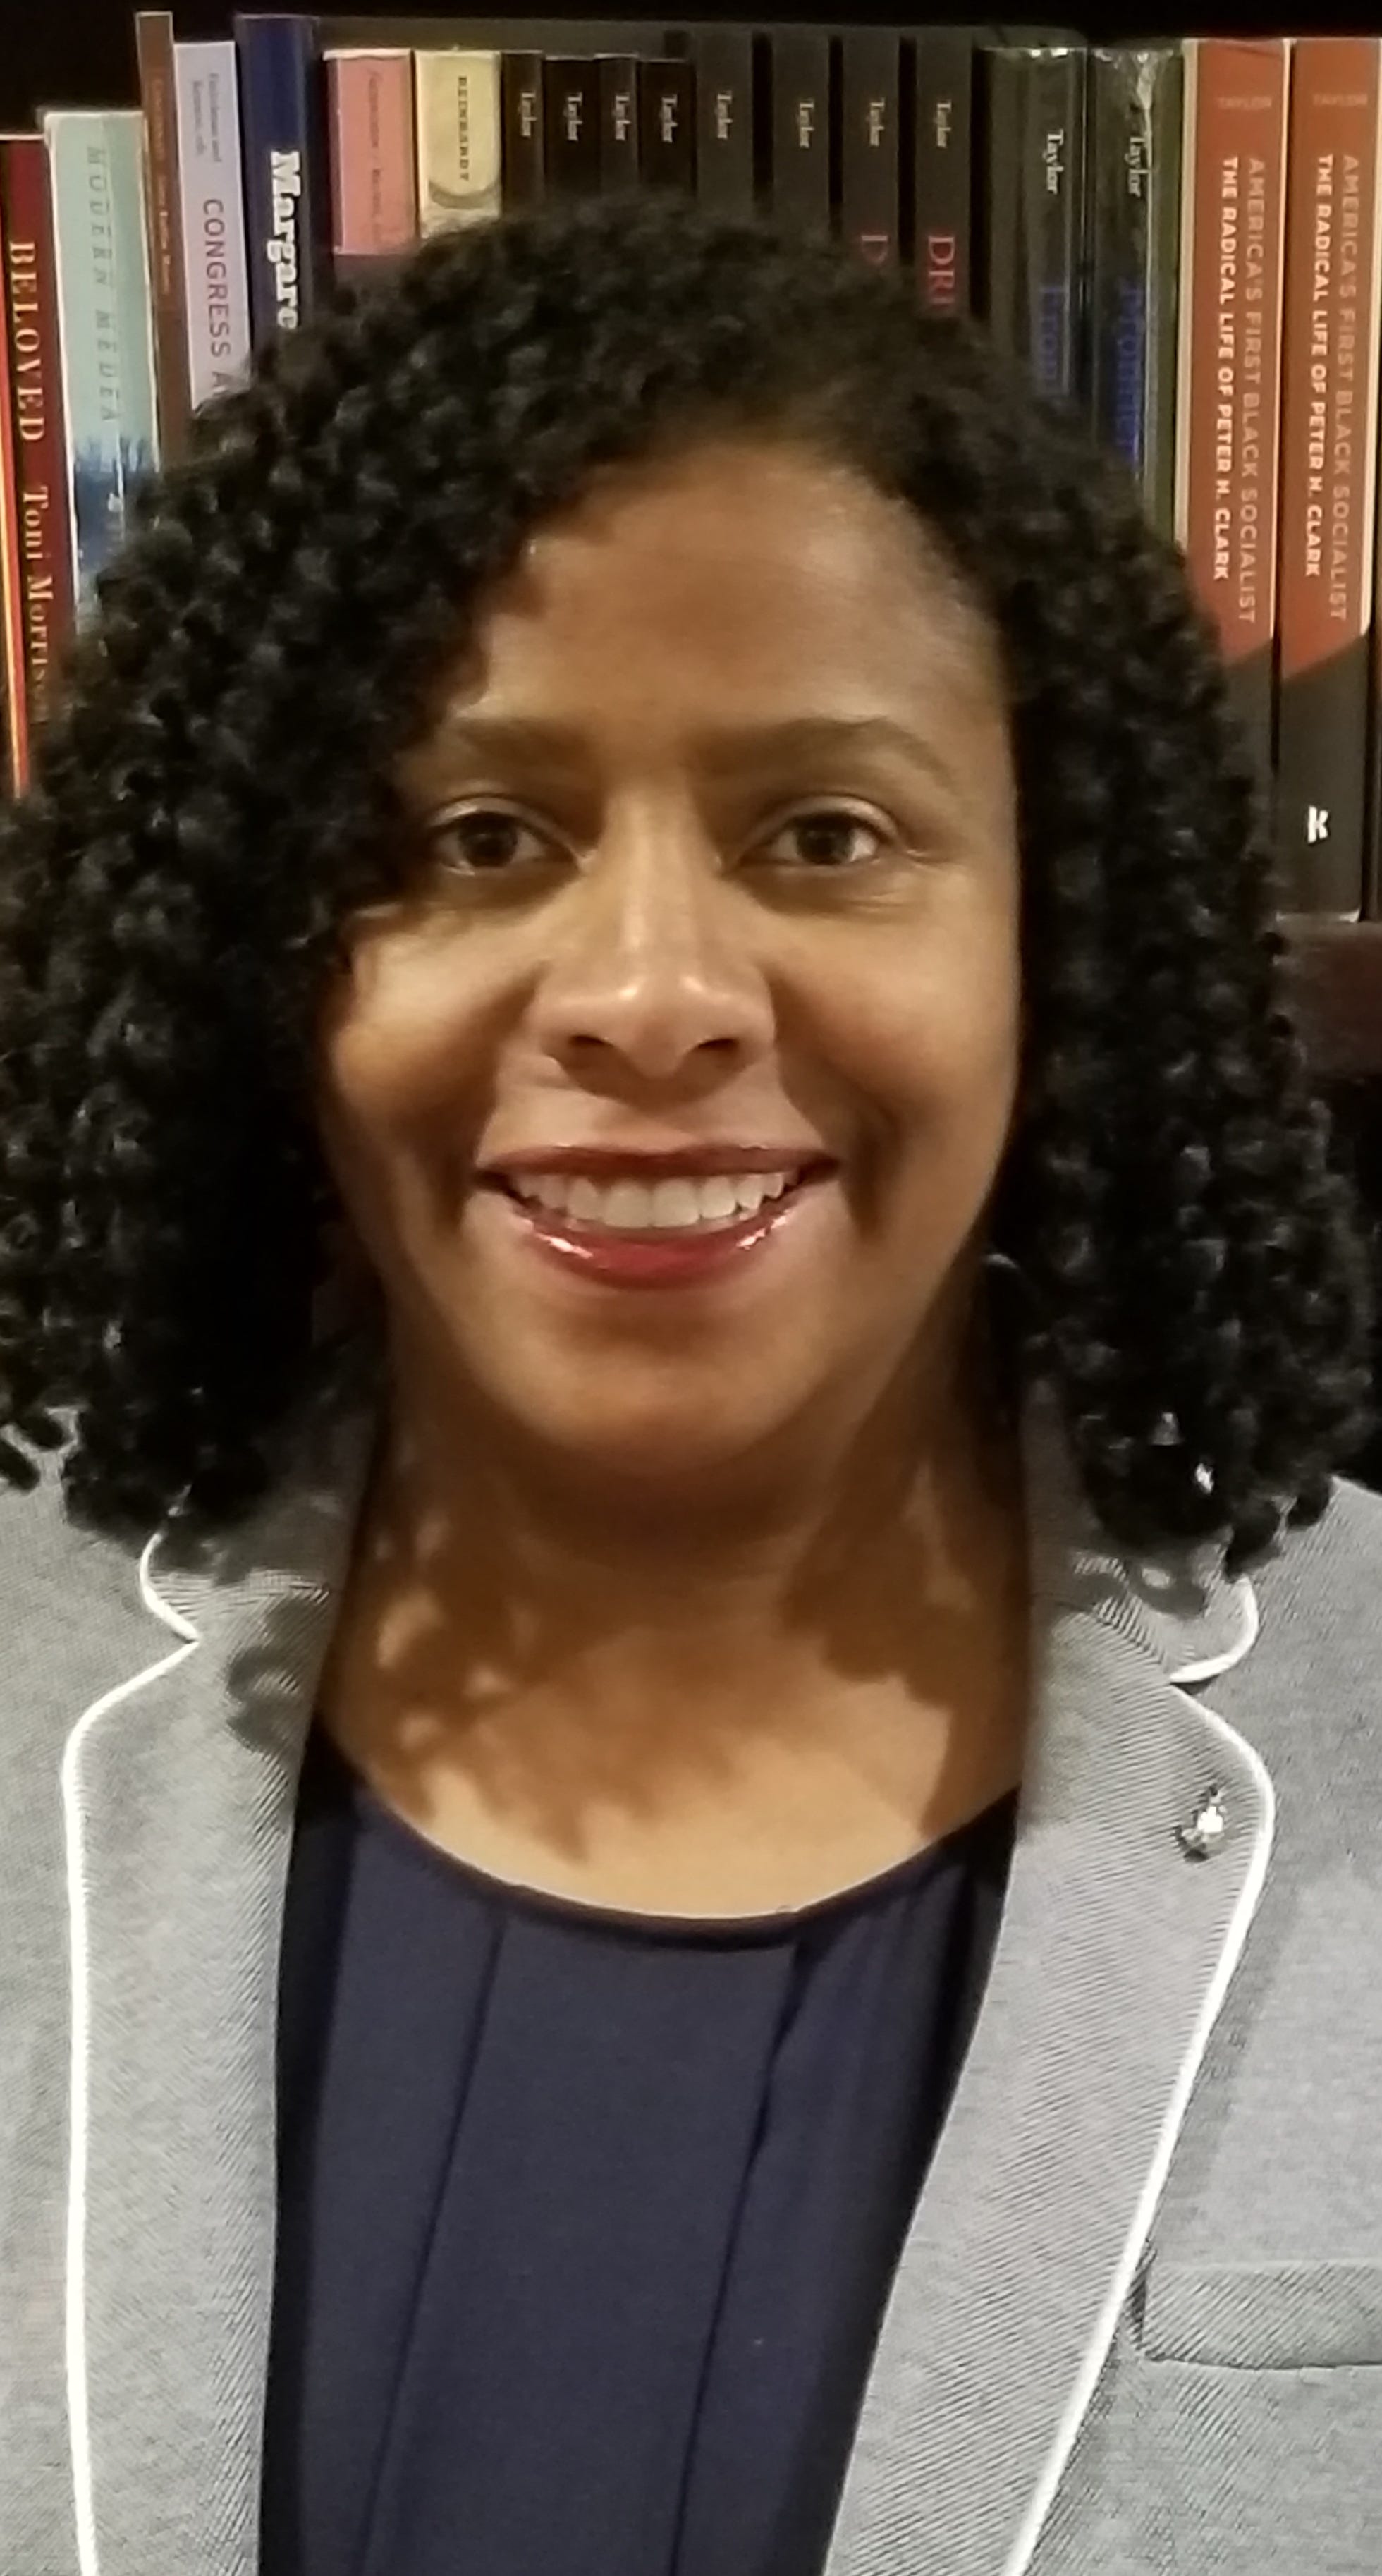 Nikki Taylor heads the history department and teaches history at Howard University in Washington, D.C.